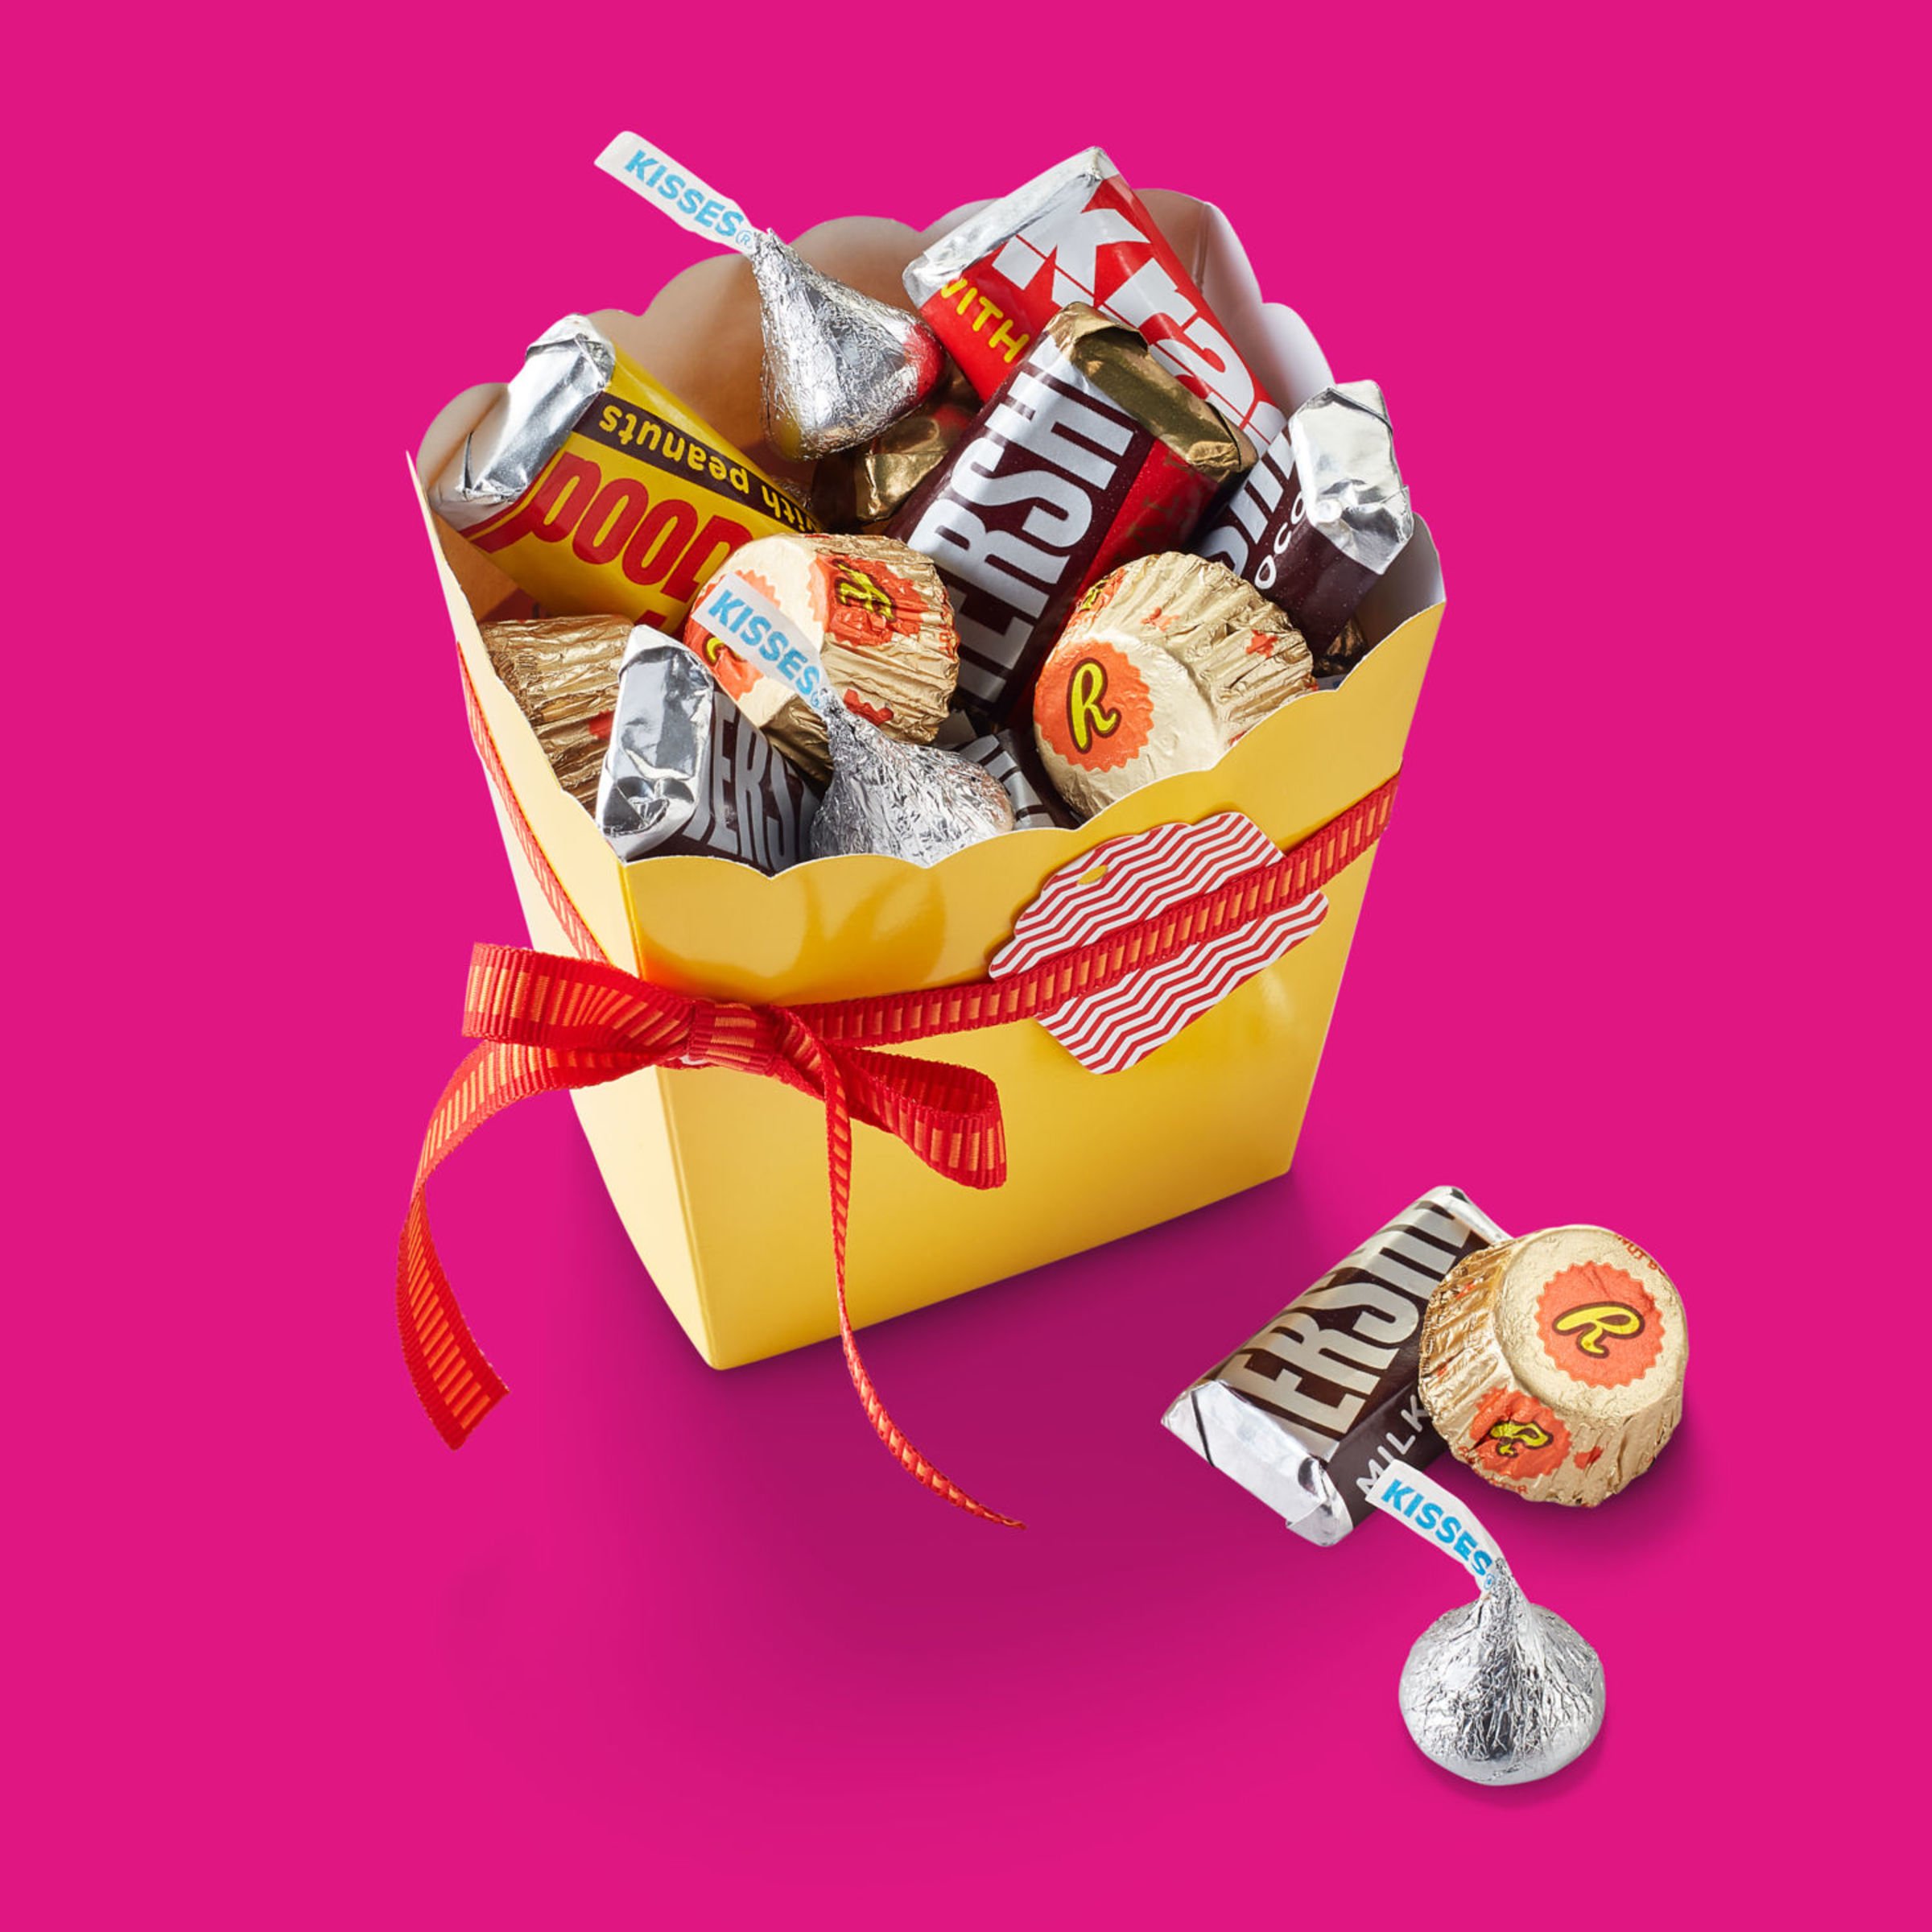 Hershey's & Reese's Assorted Snack Size Chocolate Candy - Party Pack - Shop  Candy at H-E-B